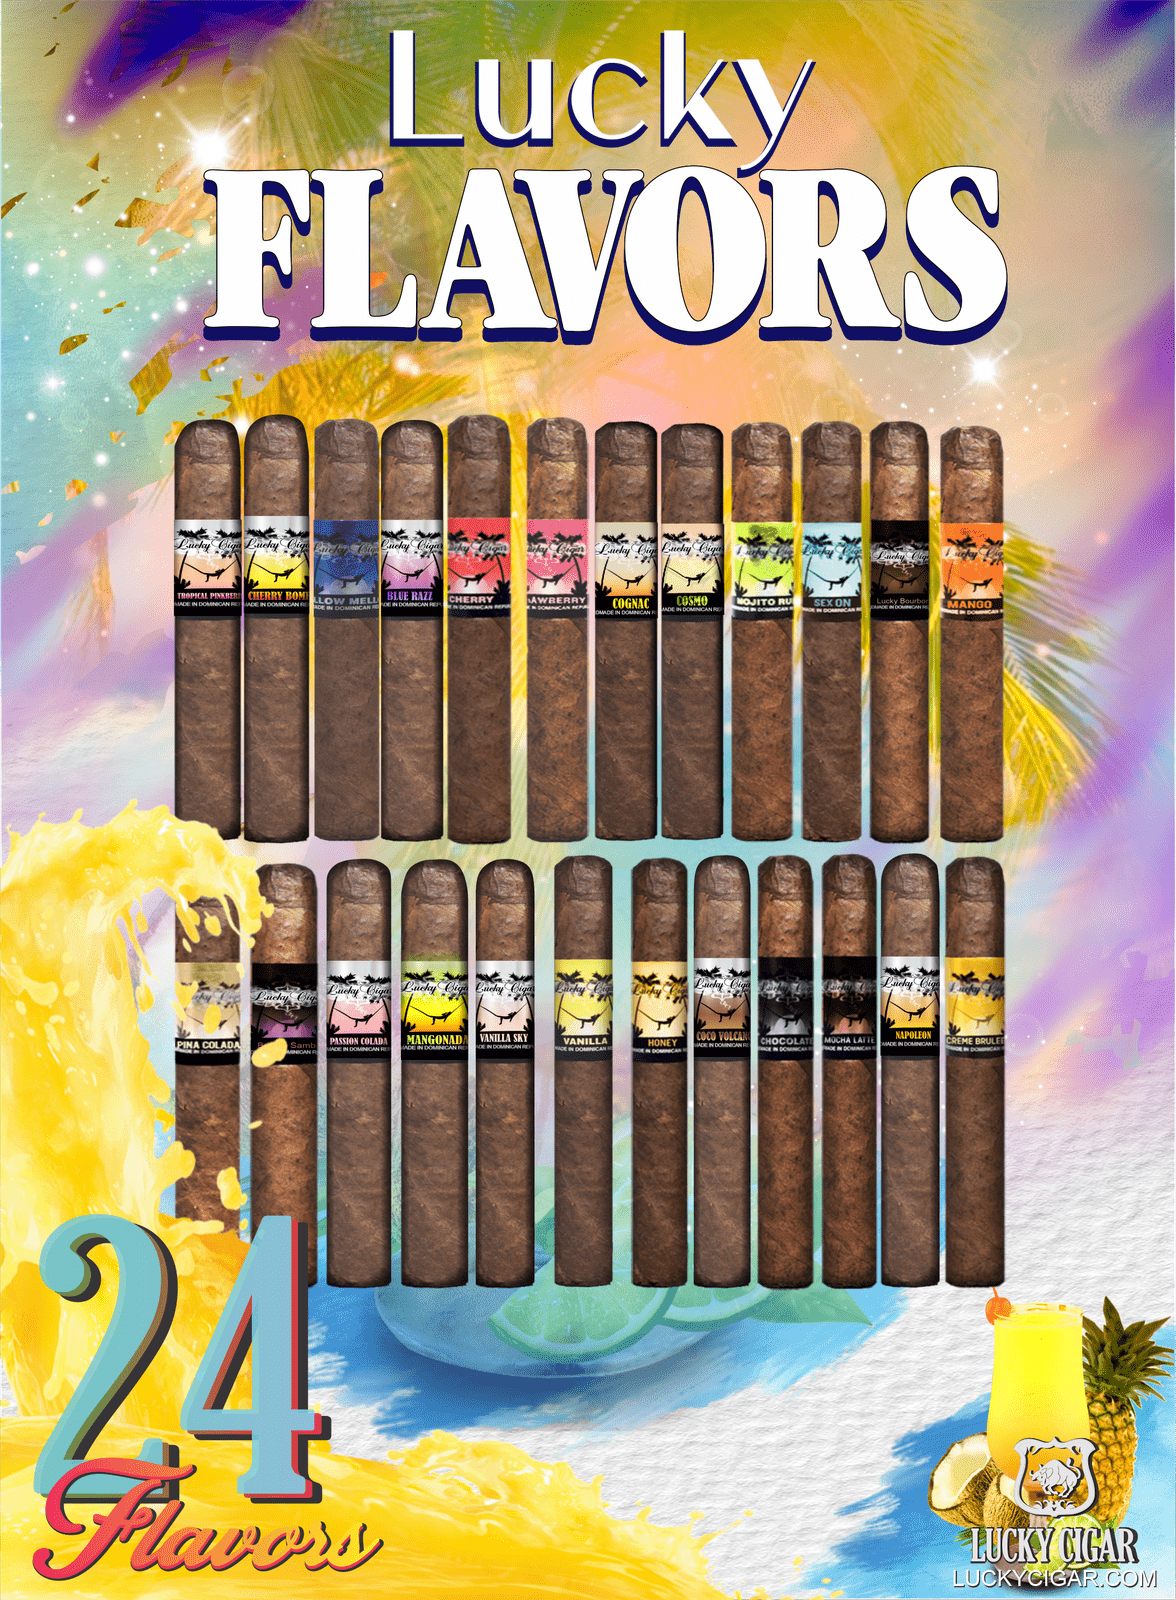 Flavored Cigars: Lucky Flavors 24 Piece Try Them All Sampler